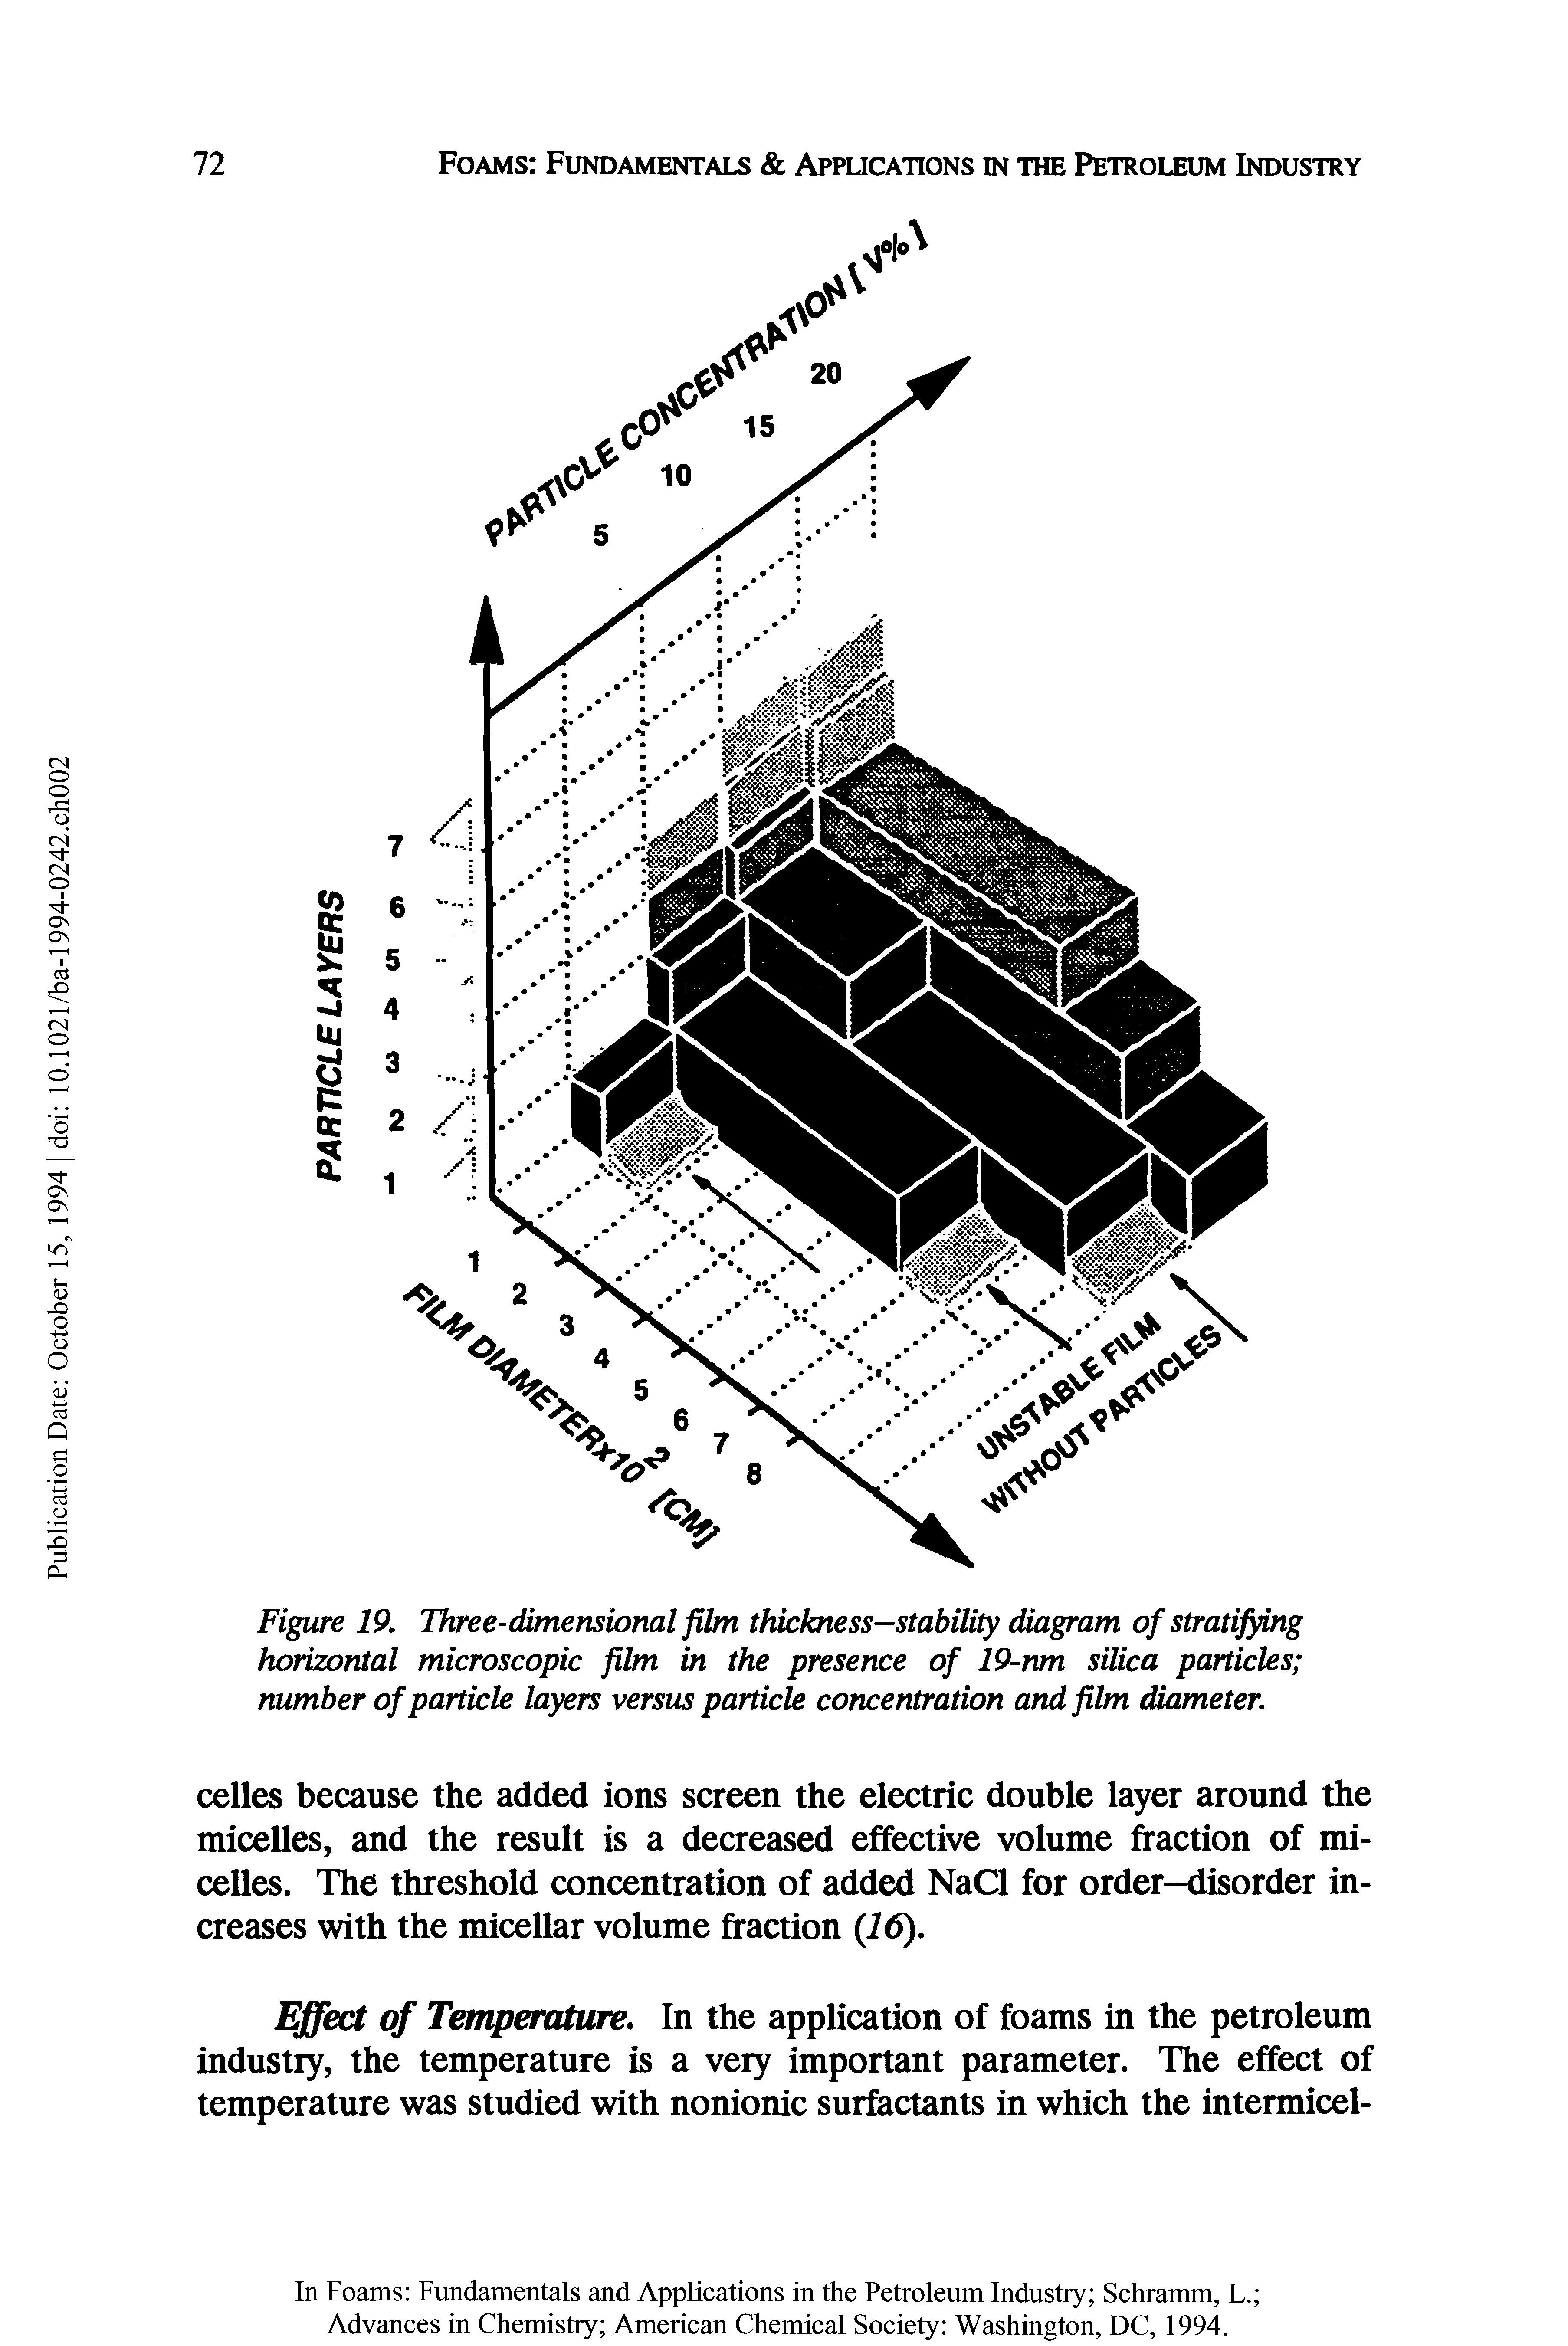 Figure 19. Three-dimensional film thickness—stability diagram of stratifying horizontal microscopic film in the presence of 19-nm silica particles number of particle layers versus particle concentration and film diameter.